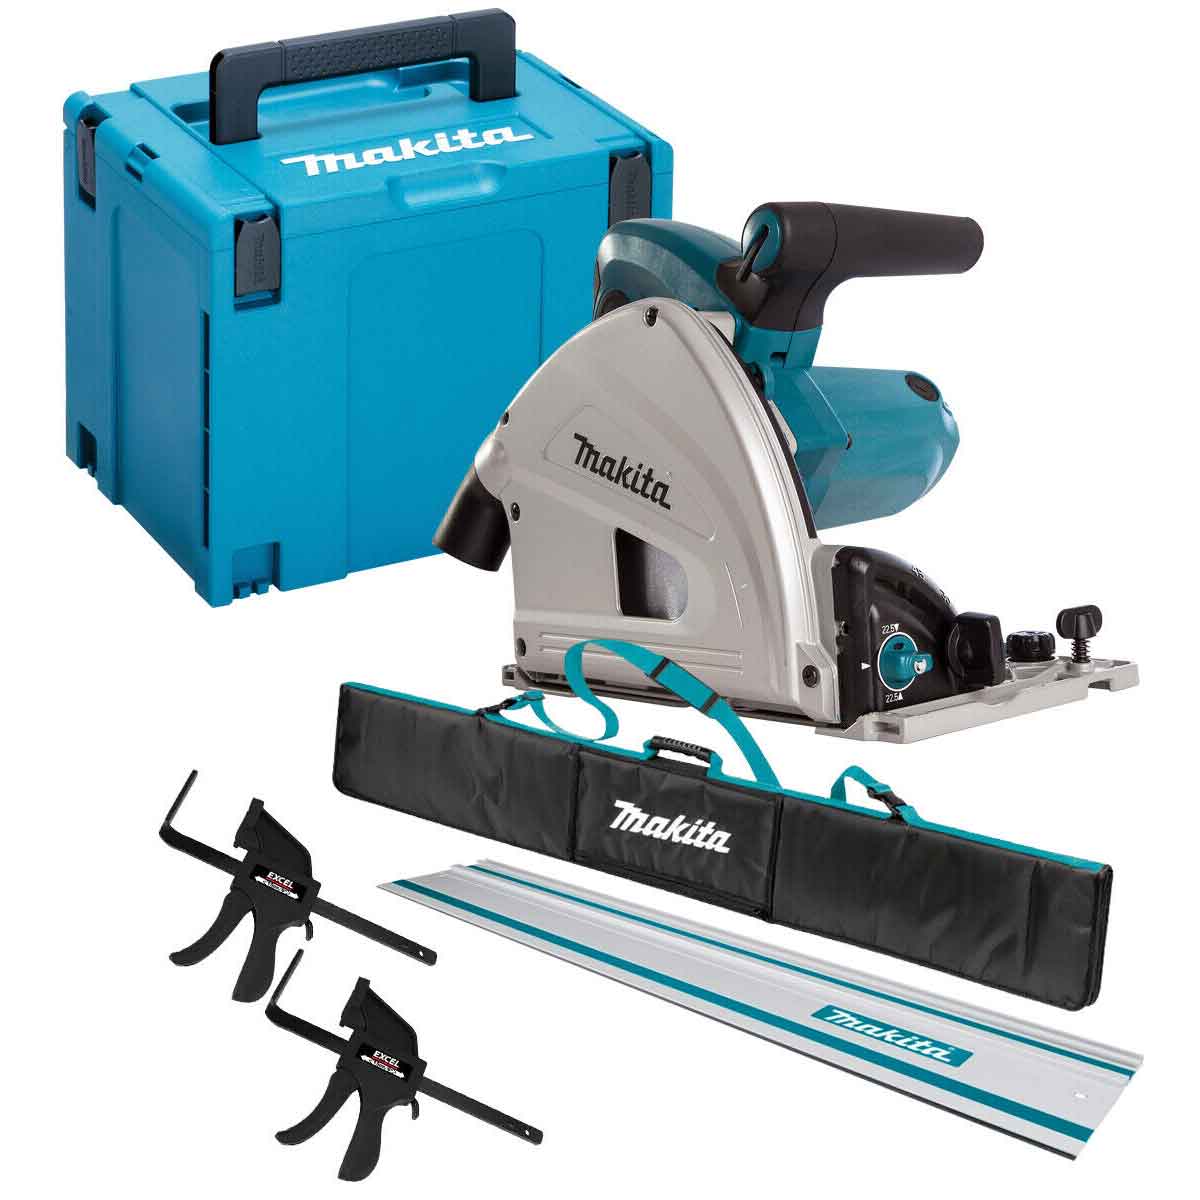 Makita SP6000J1 240V 165mm Plunge Saw with 1 x Clamp & Bag – Excel